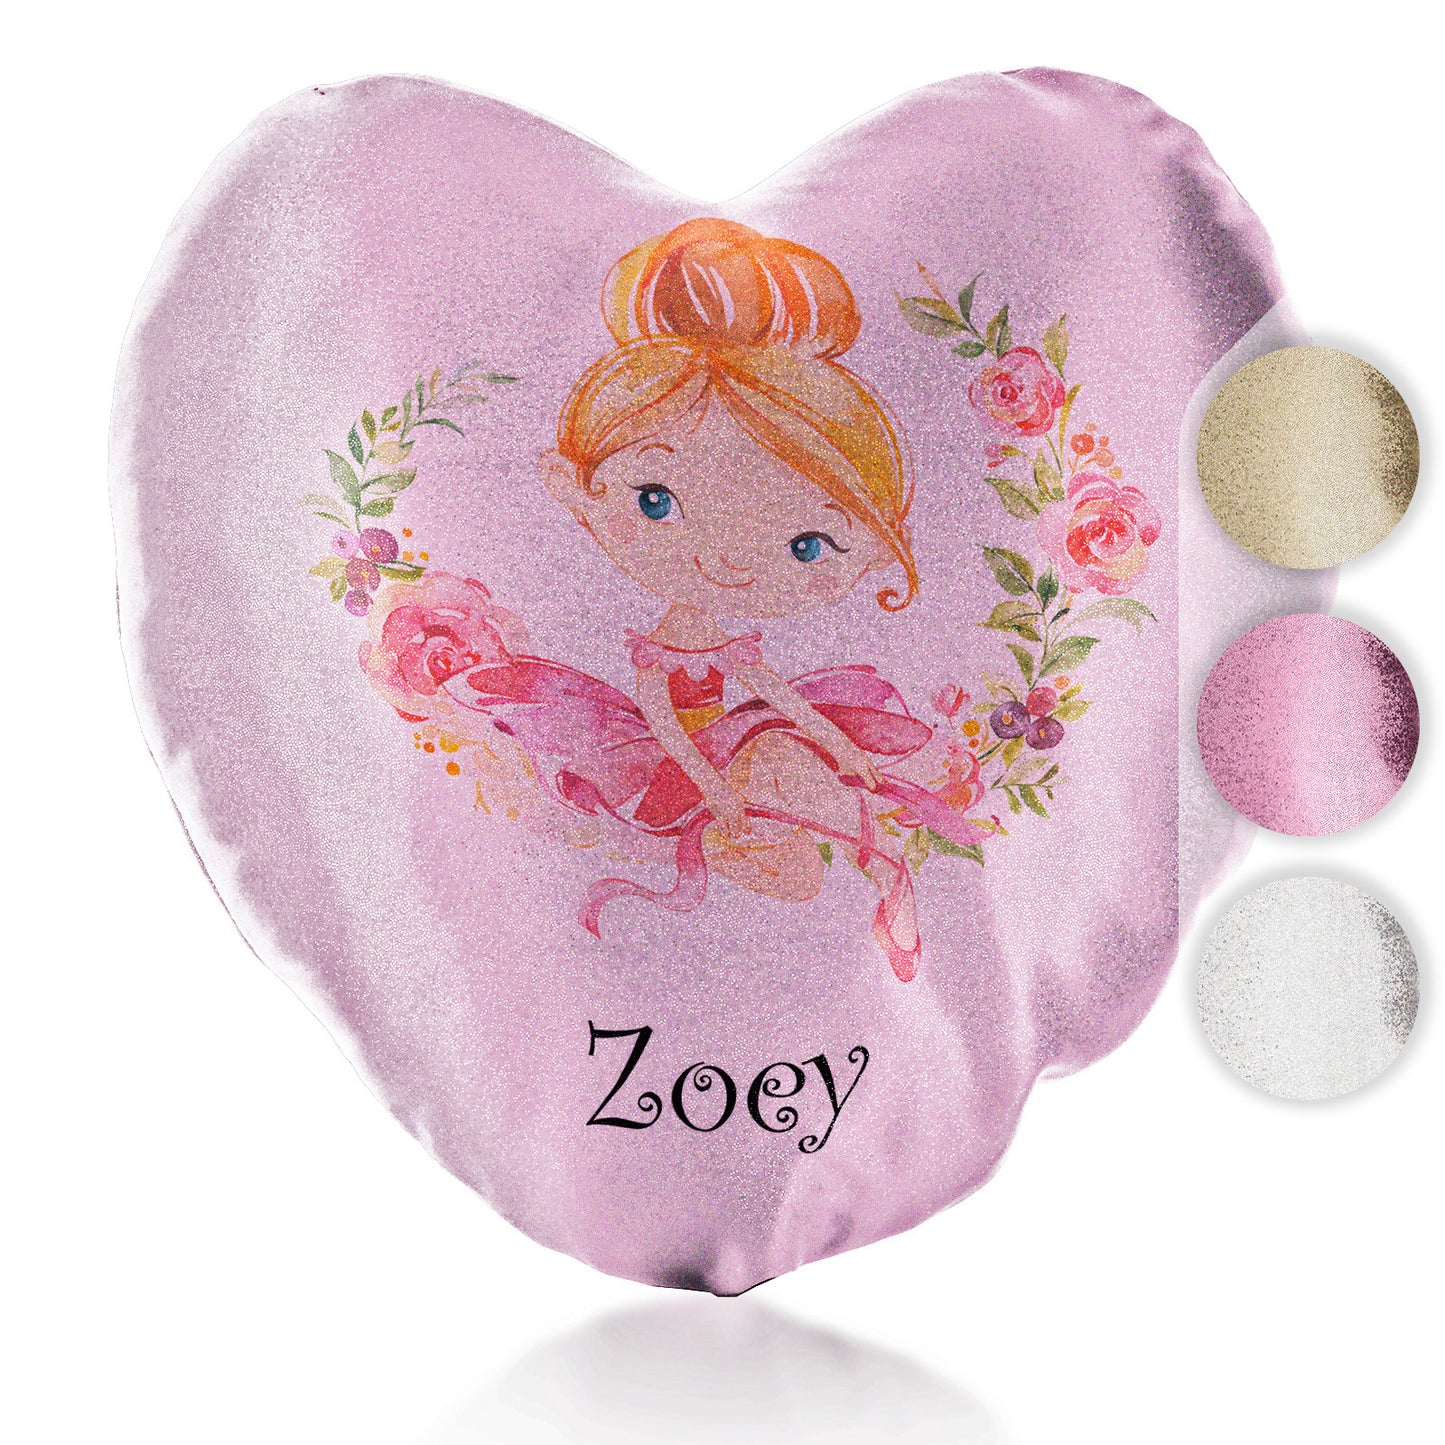 Personalised Glitter Heart Cushion with Cute Text and Flower Wreath Red Hair Ballerina